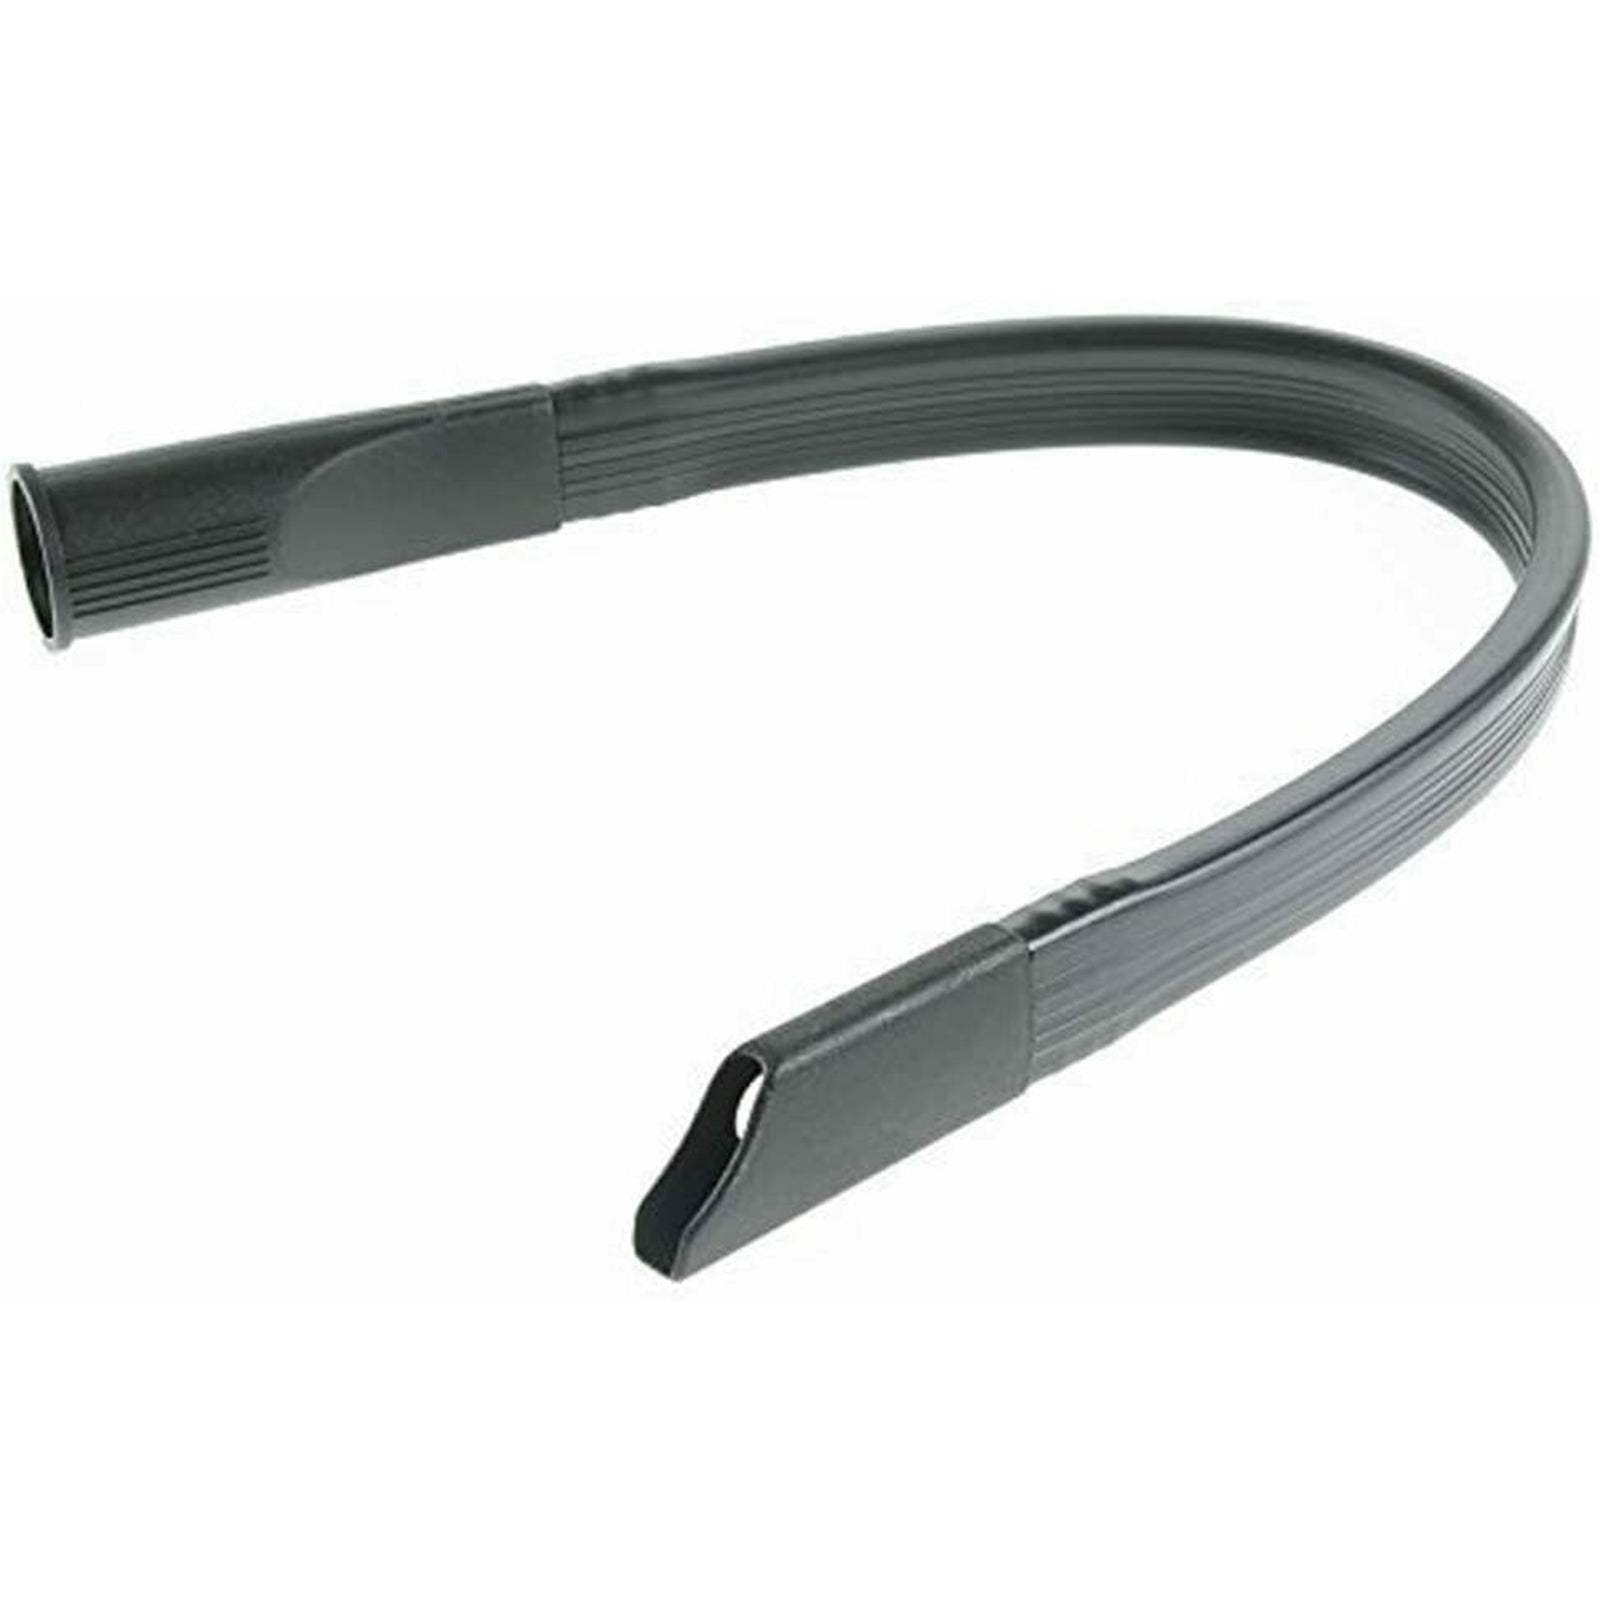 Flexible Crevice Tool Extra Long compatible with HITACHI Vacuum Cleaner (32mm or 35mm)